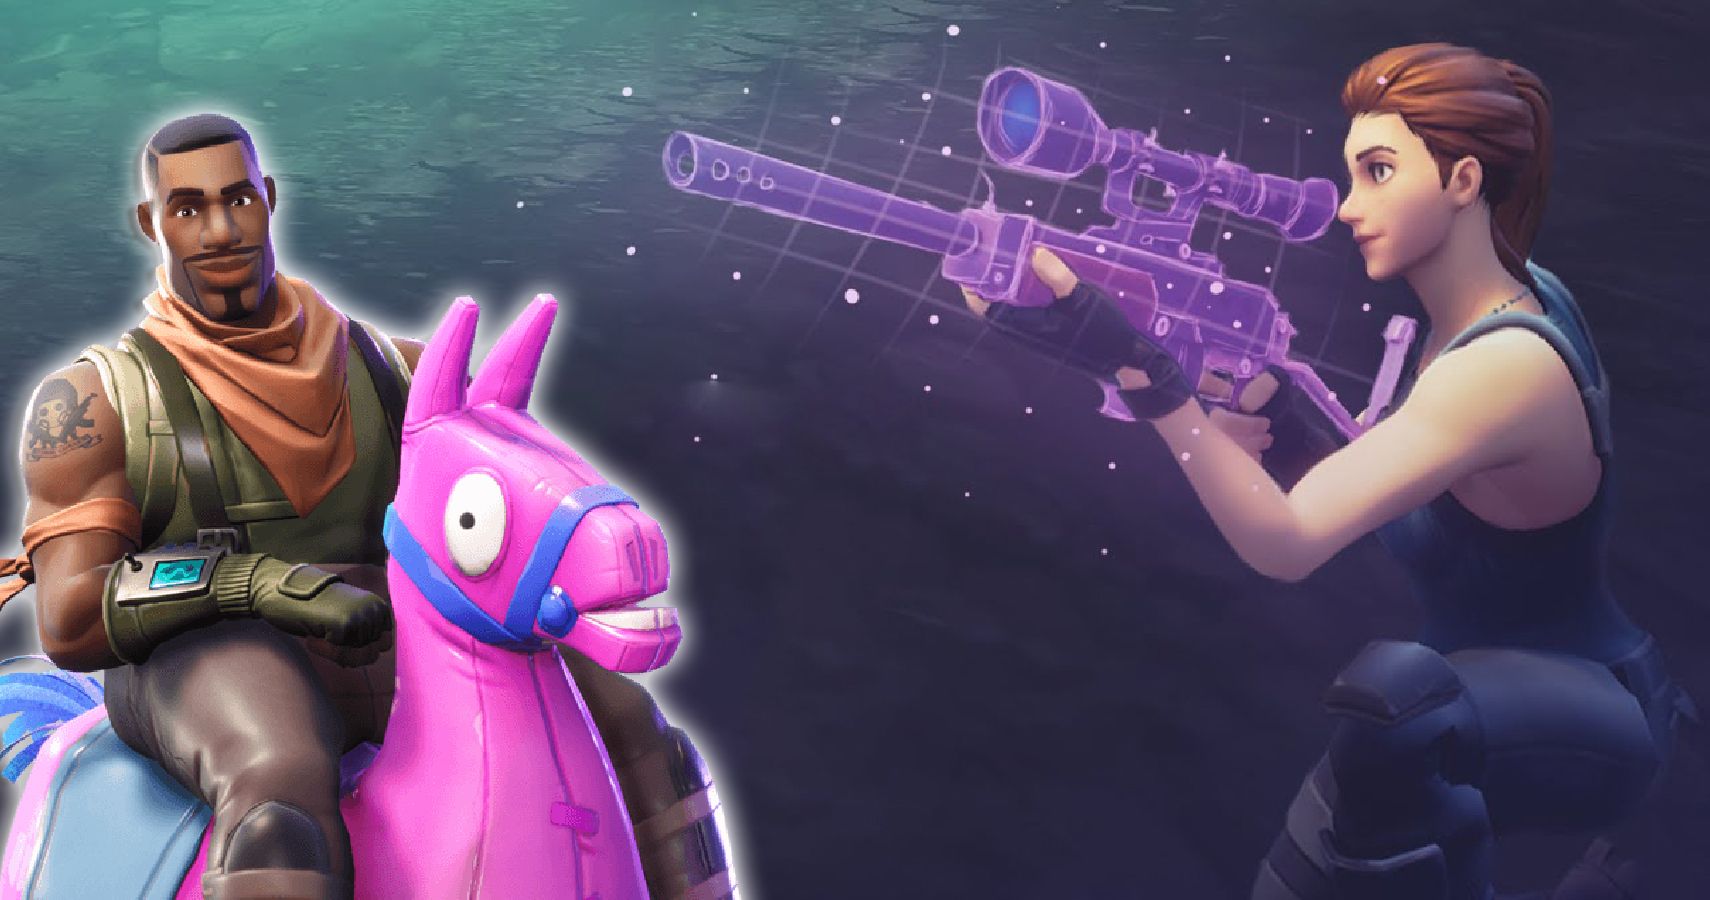 Llamas and buildings got nerfed in Fortnite's latest update - Polygon